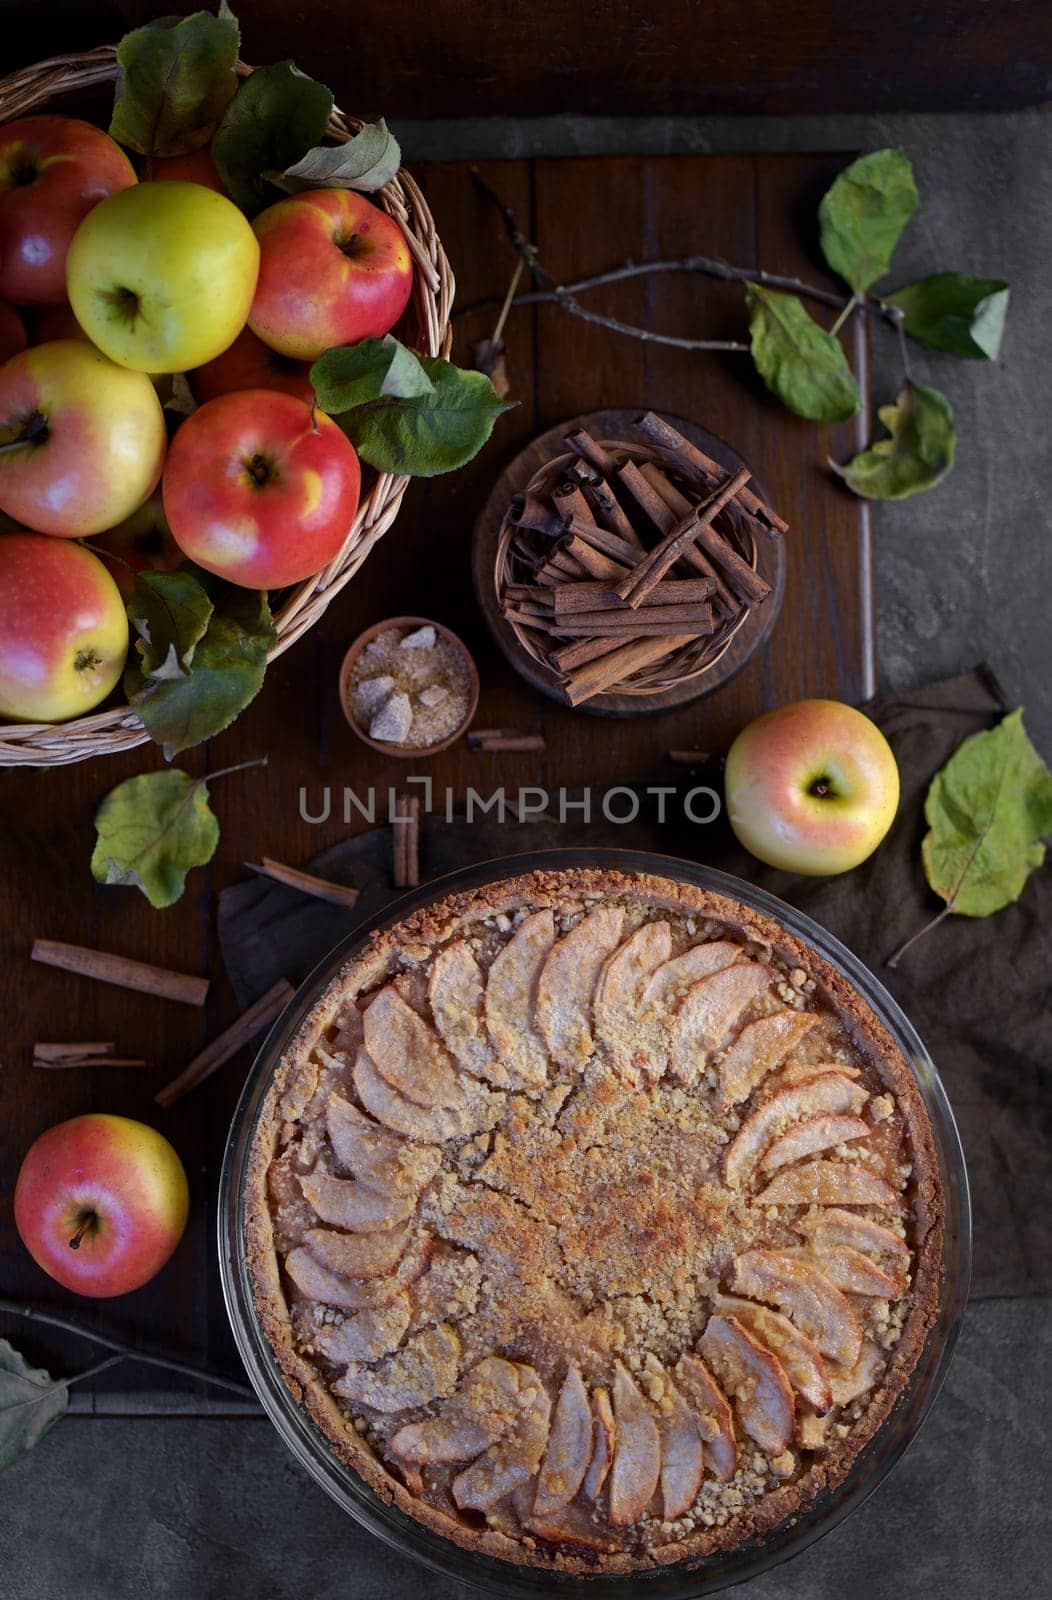 Home made apple pie with fresh fruits on a wooden table